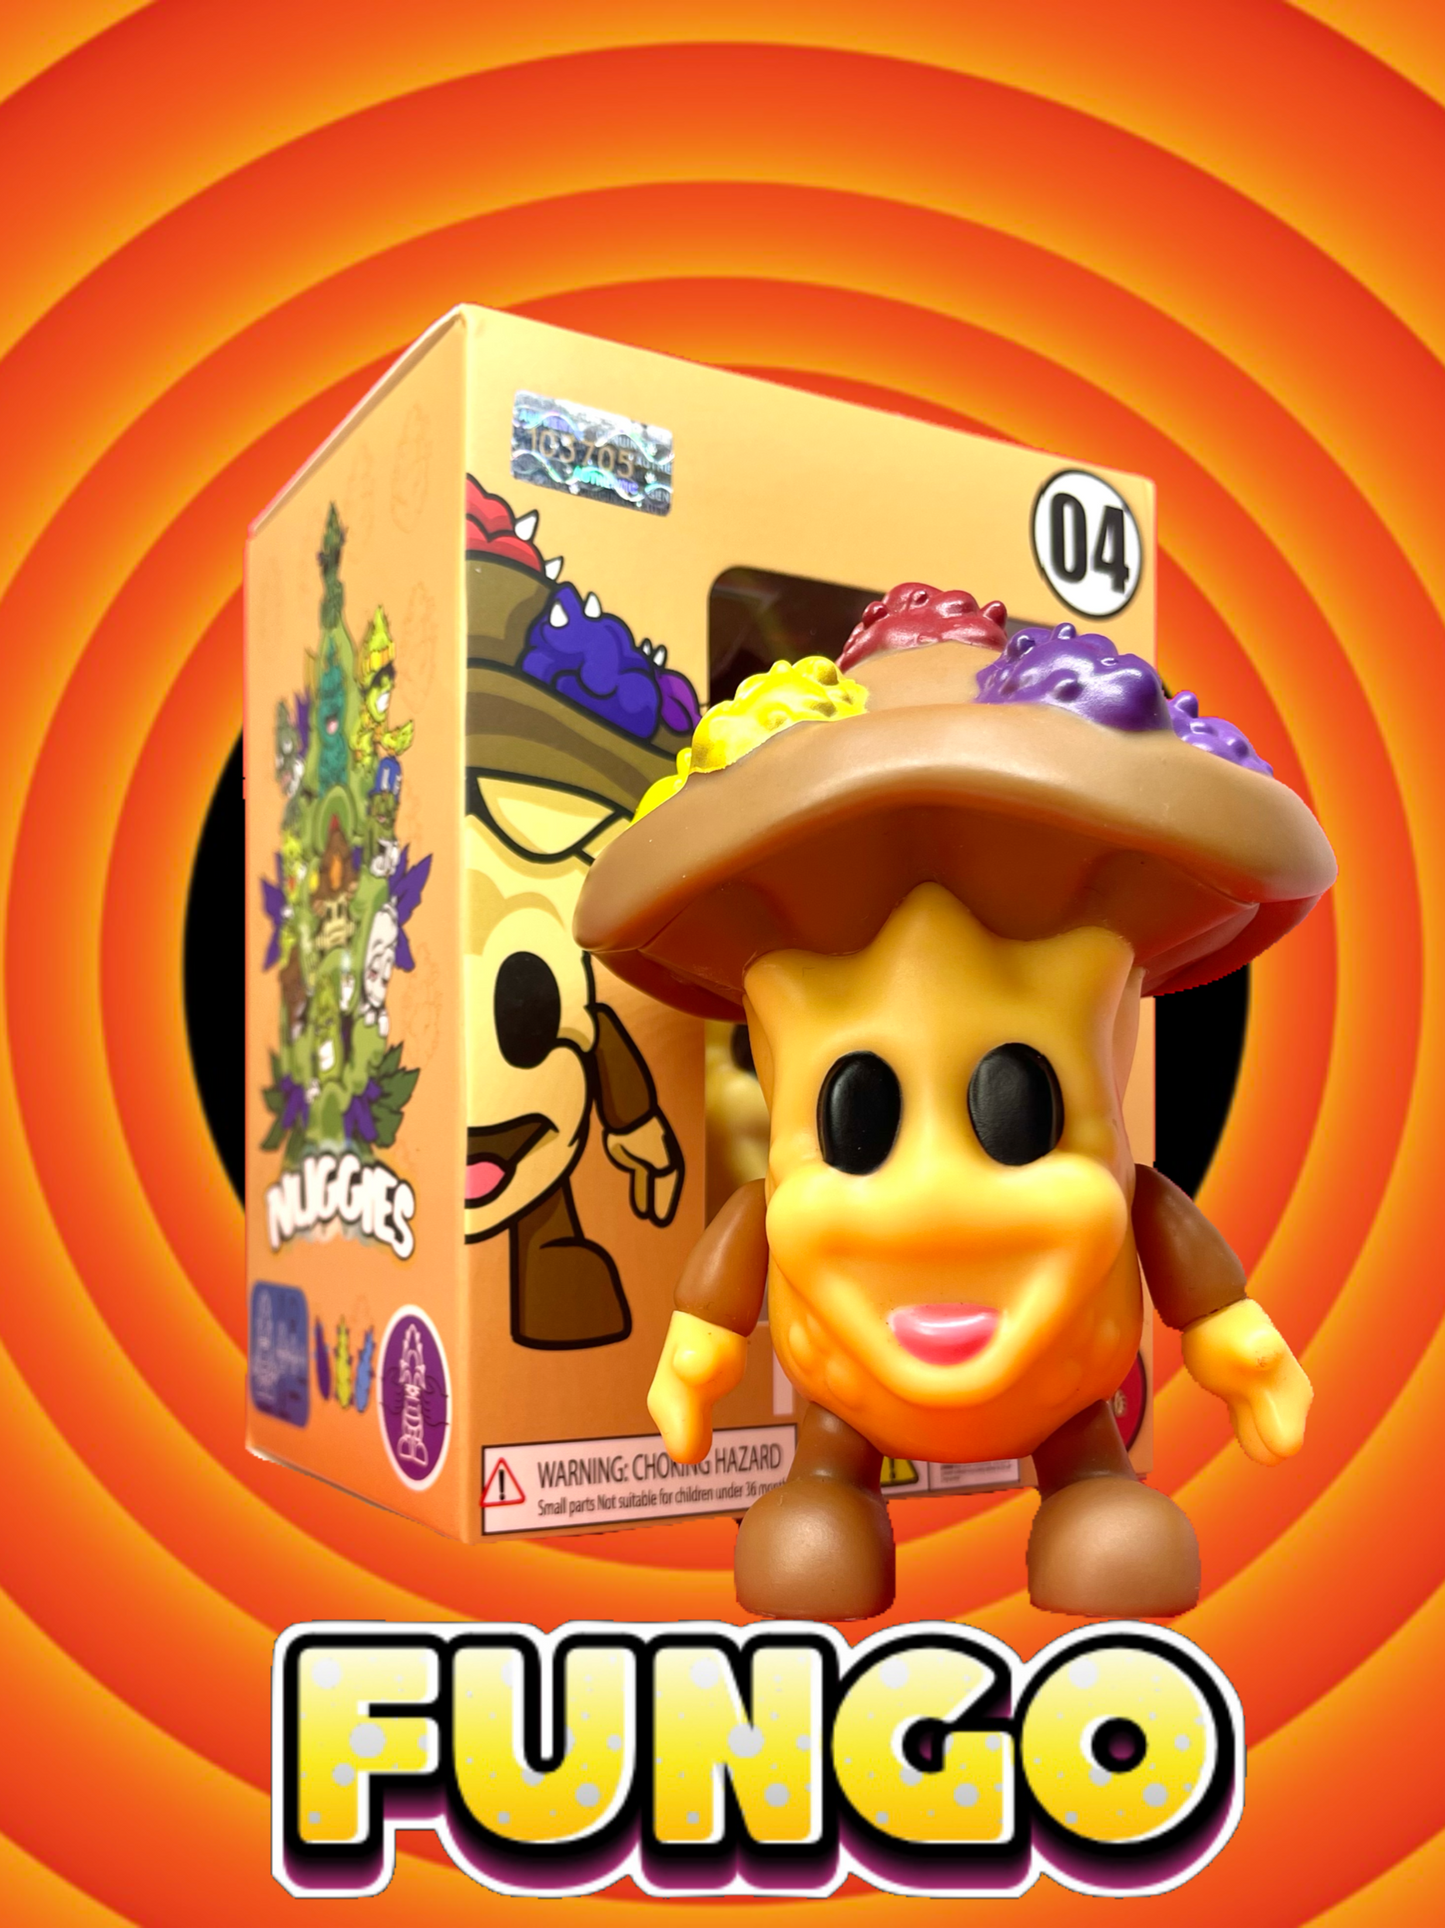 Fungo Limited Edition Collectible 1 of 500, 4-inch hand-painted figures, with first edition collectible box